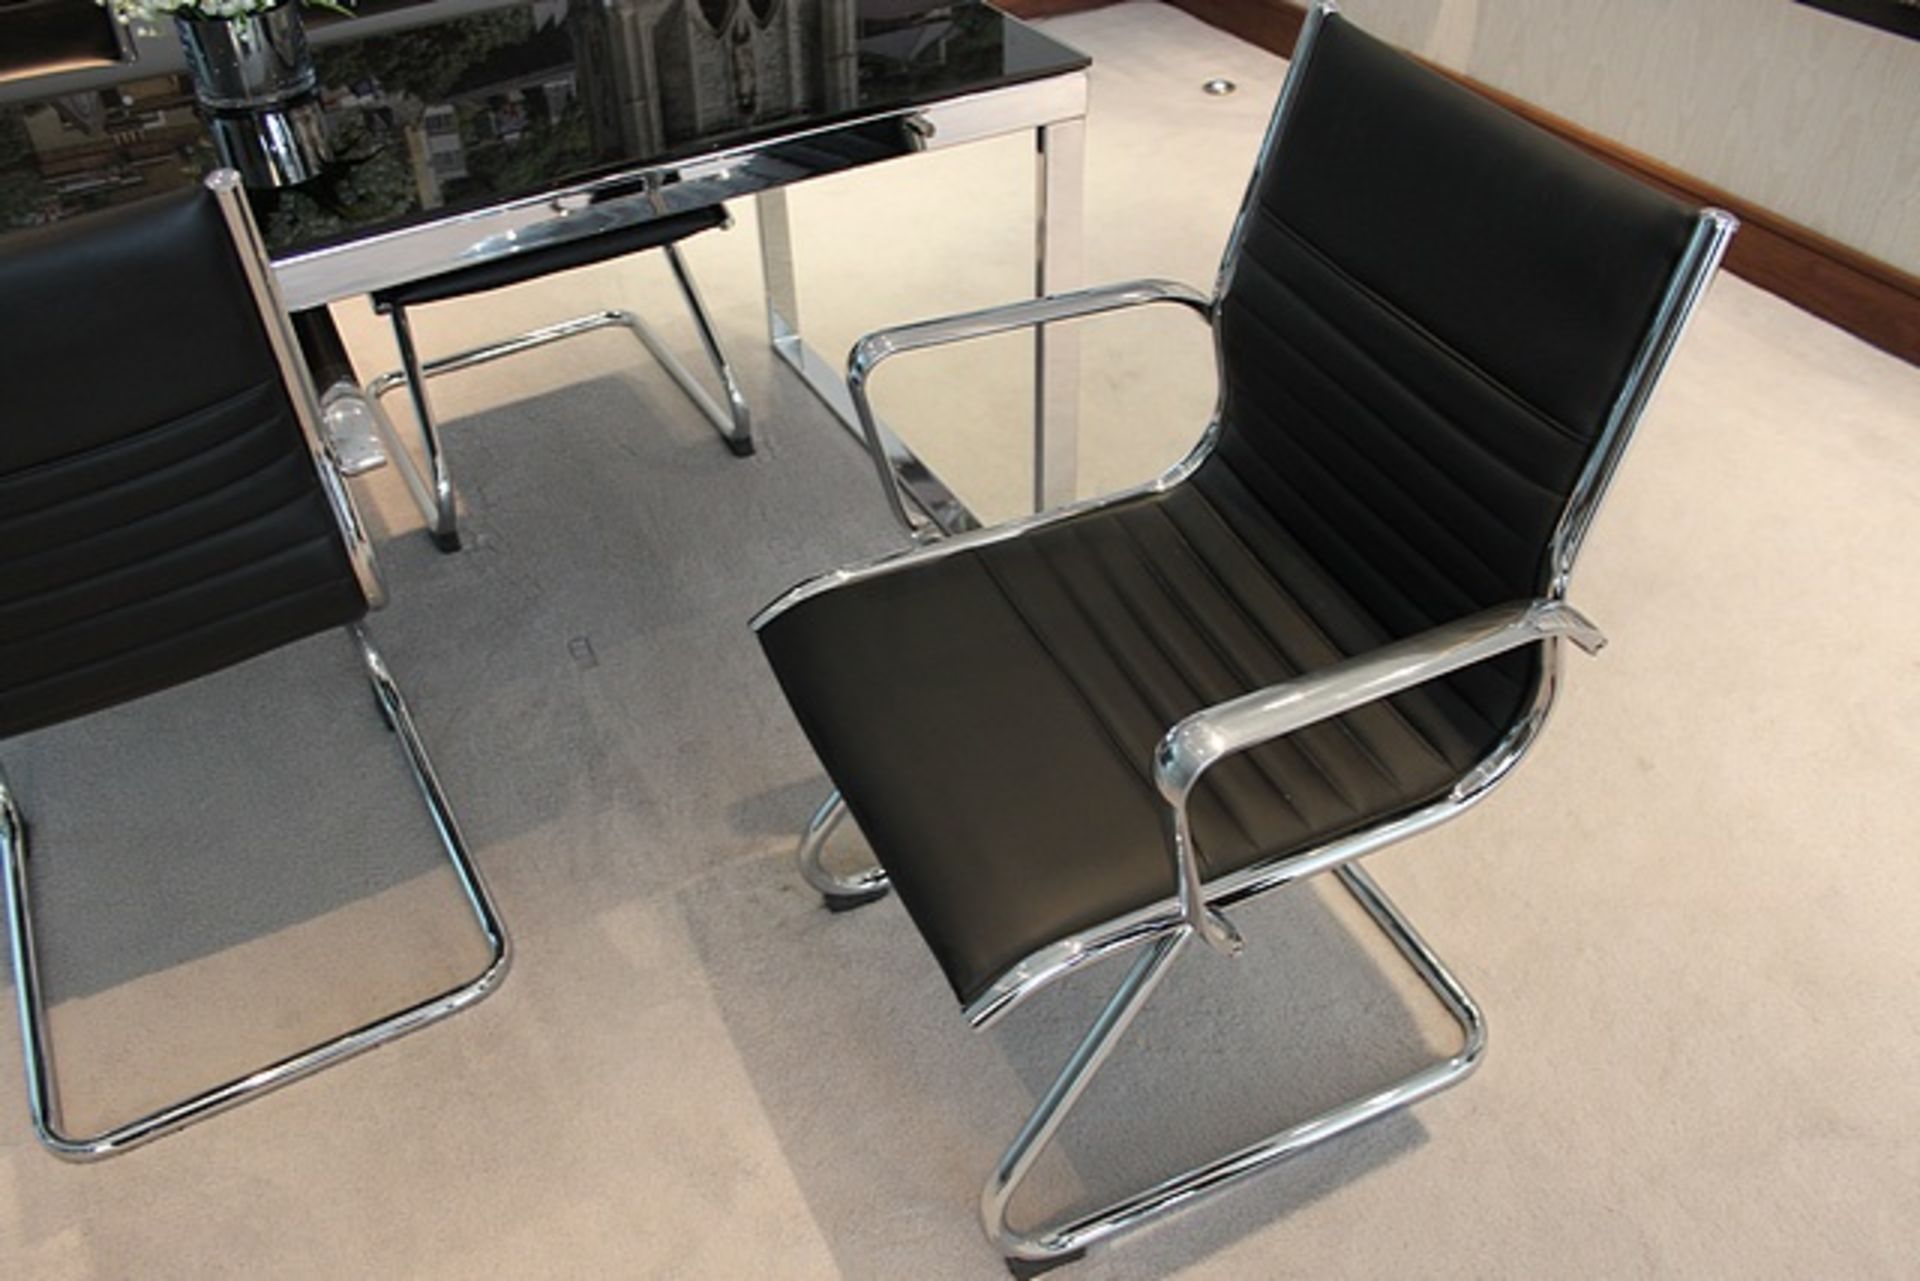 Dynamic Seating Ritz cantilever chrome frame leather chairs 485mm x 580mm x 890mm - Image 2 of 2